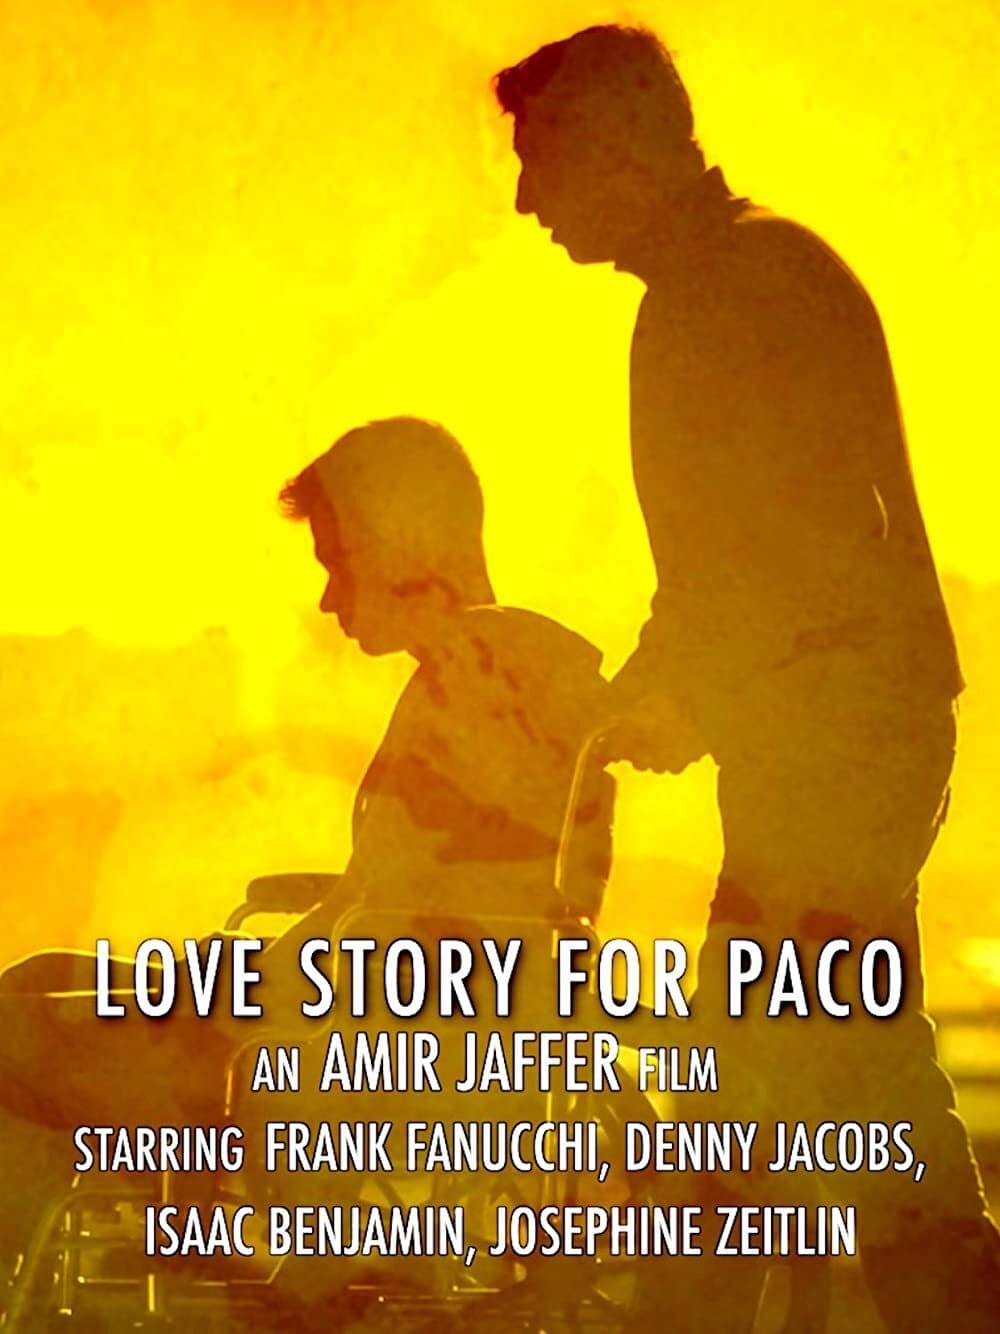 Love Story for Paco